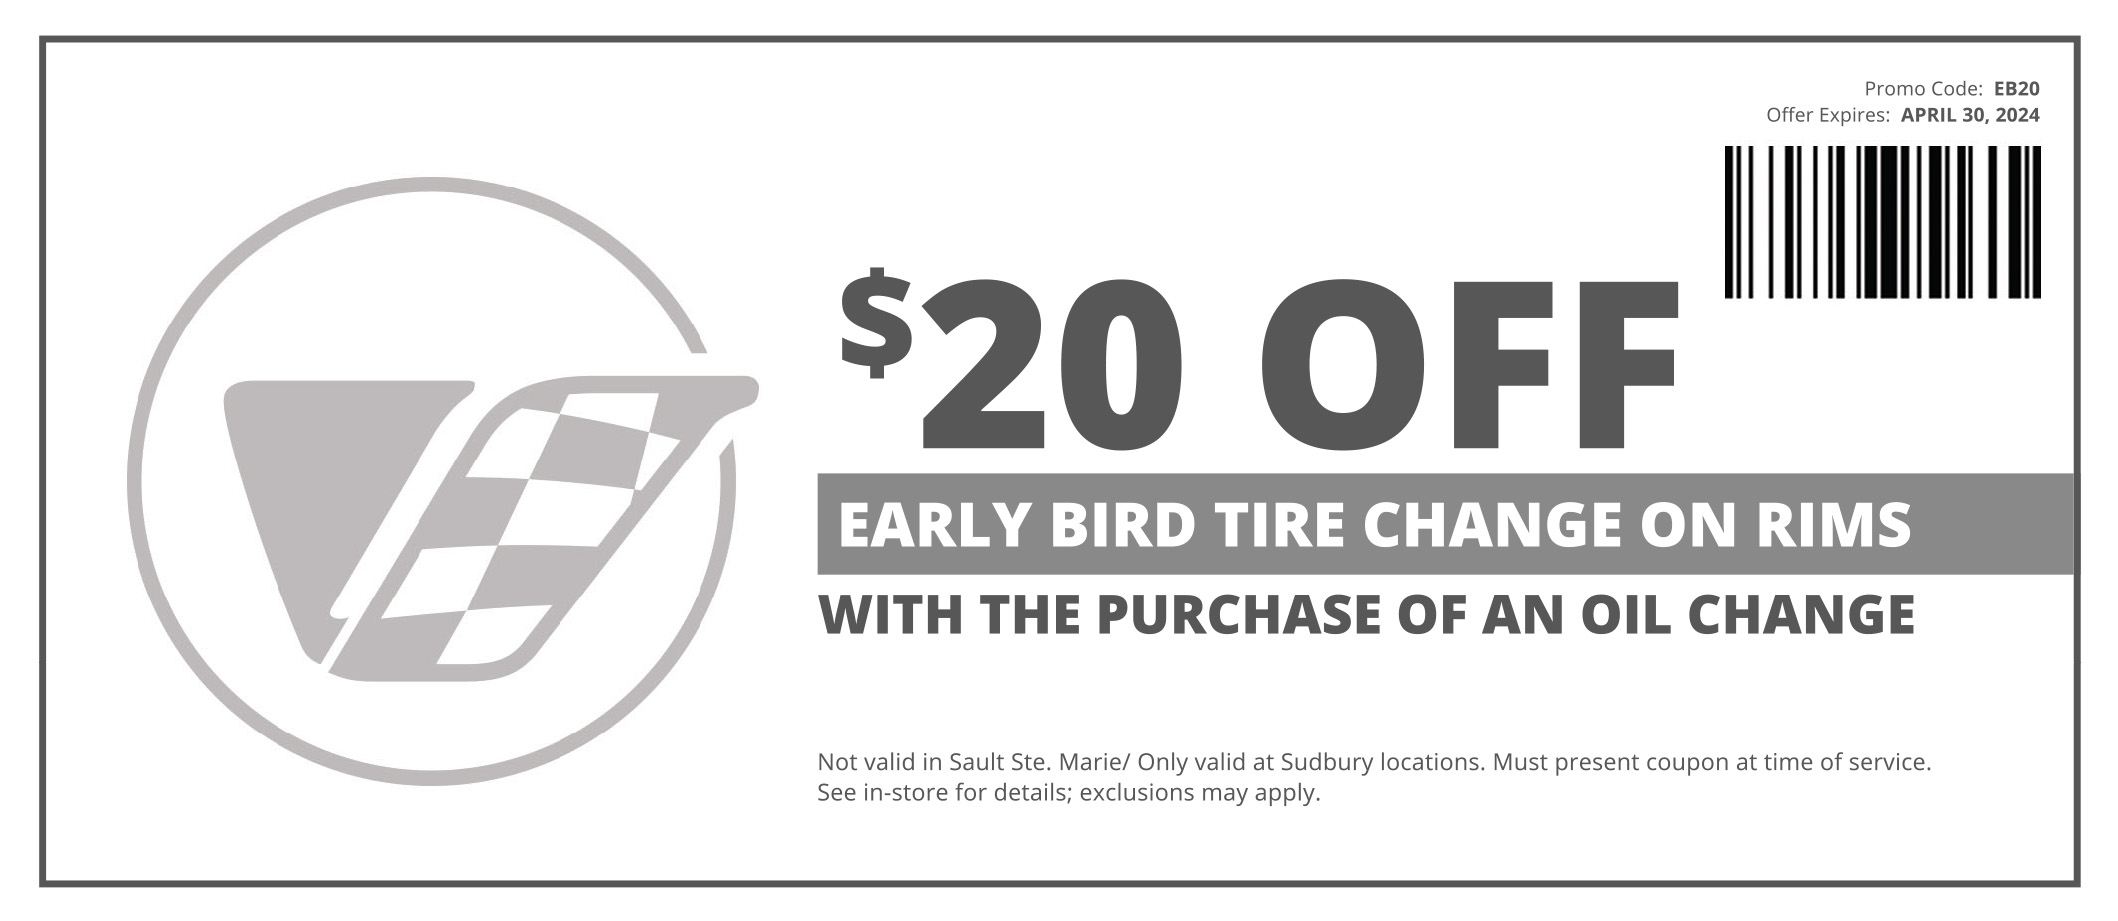 $20 off early bird tire change on rims with purchase of an oil change